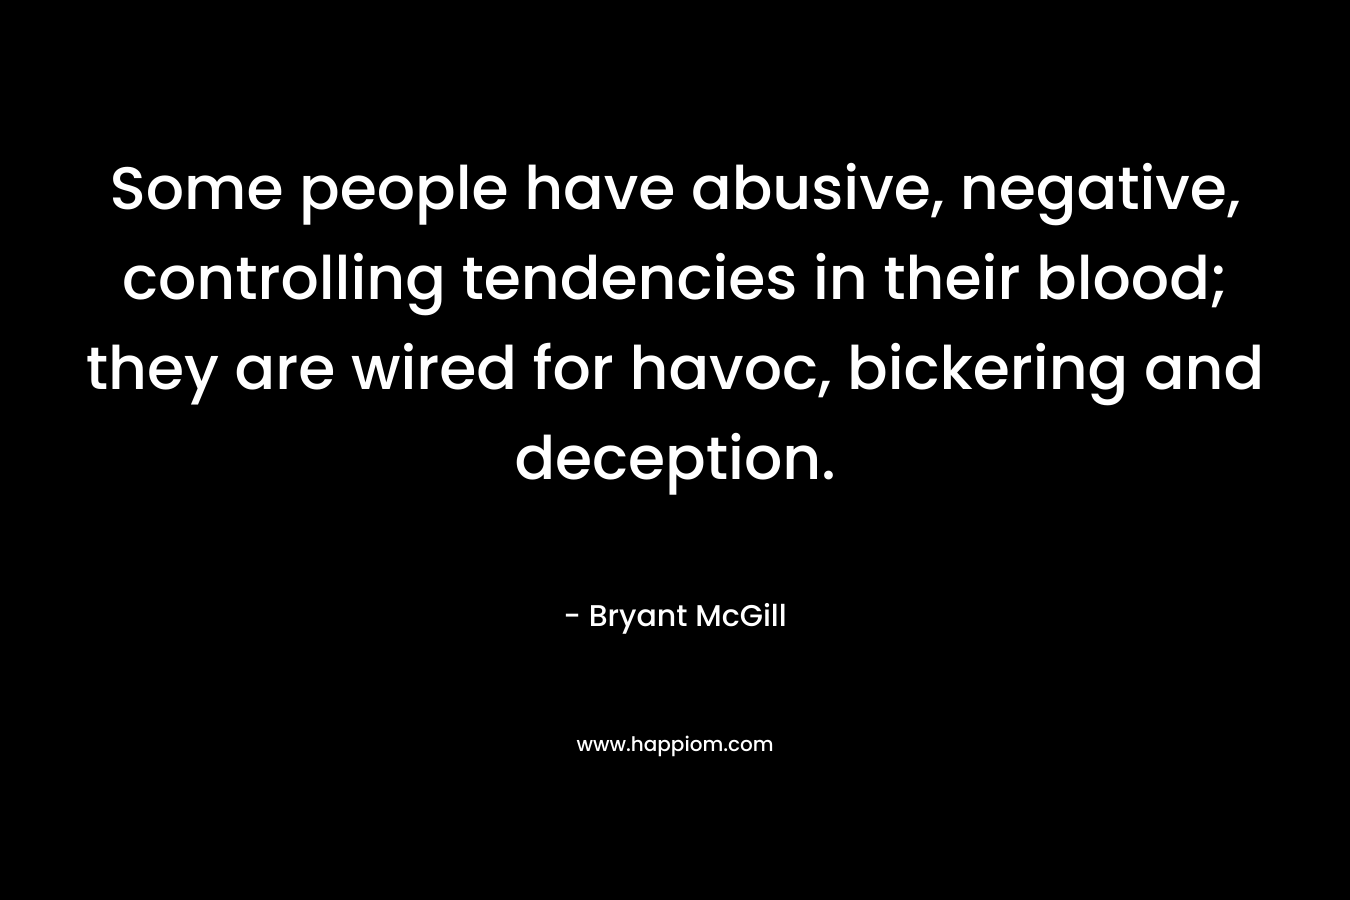 Some people have abusive, negative, controlling tendencies in their blood; they are wired for havoc, bickering and deception.